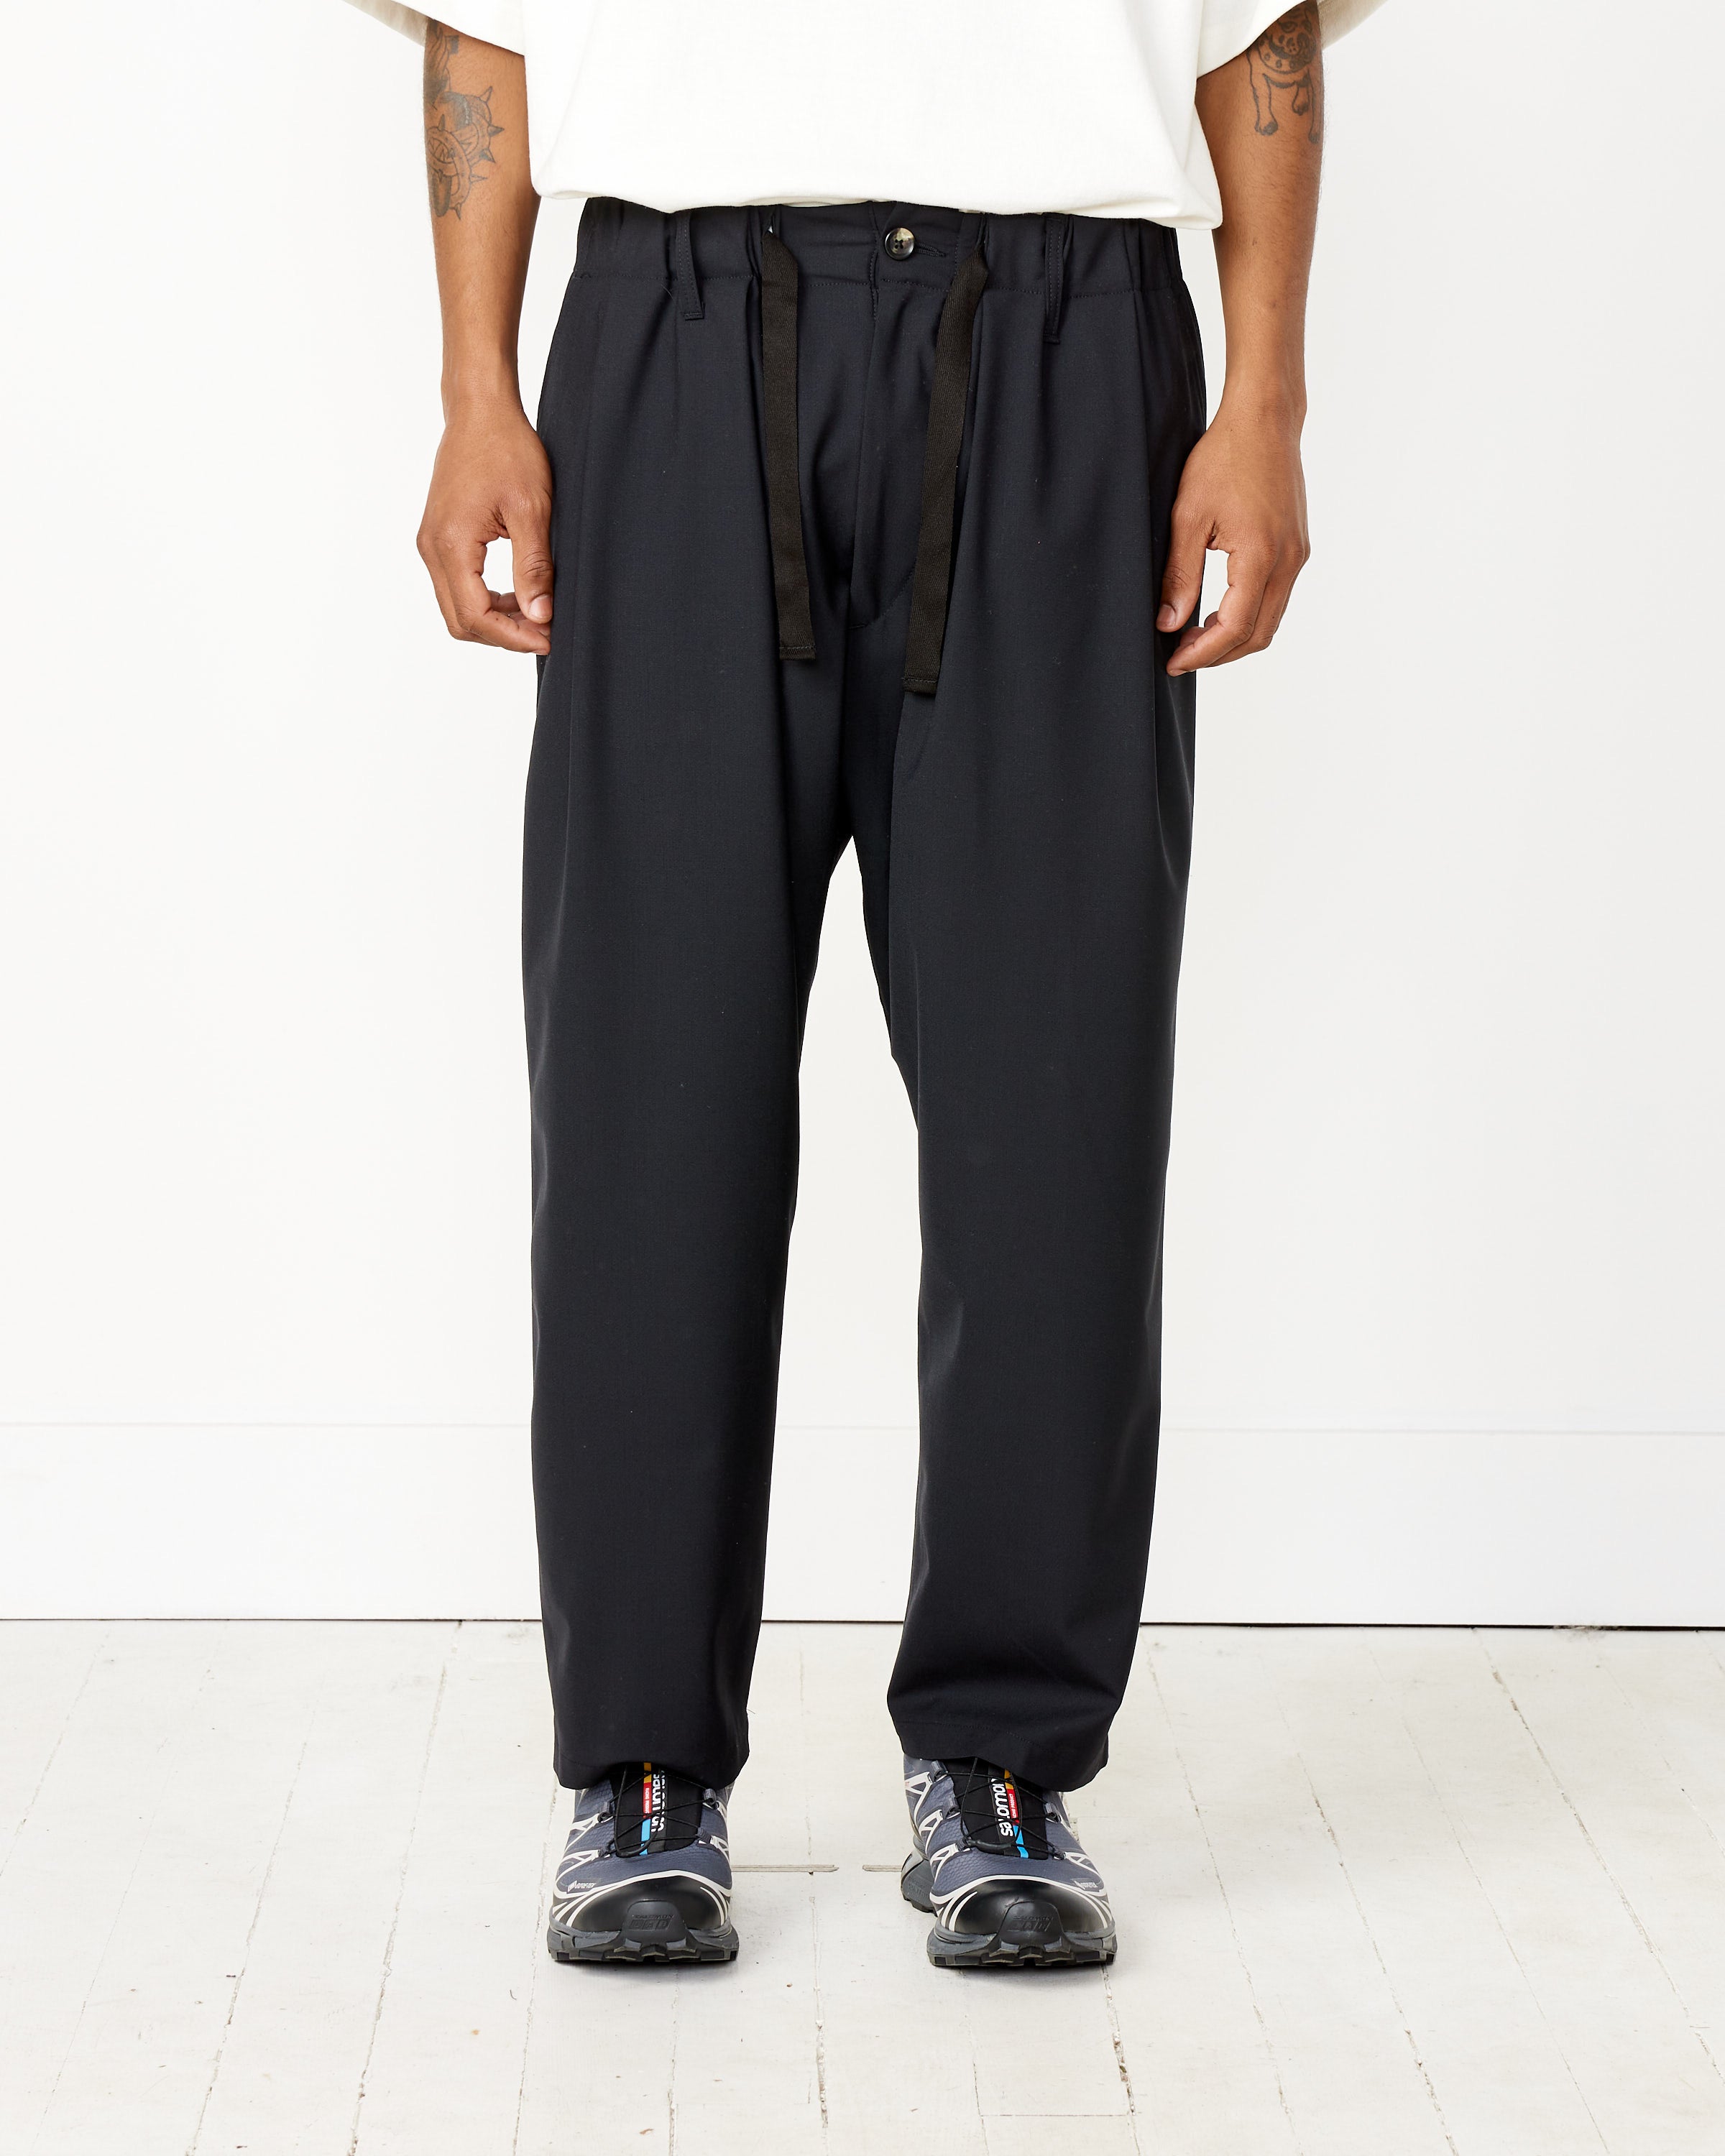 Baggy Trousers in Black – Mohawk General Store